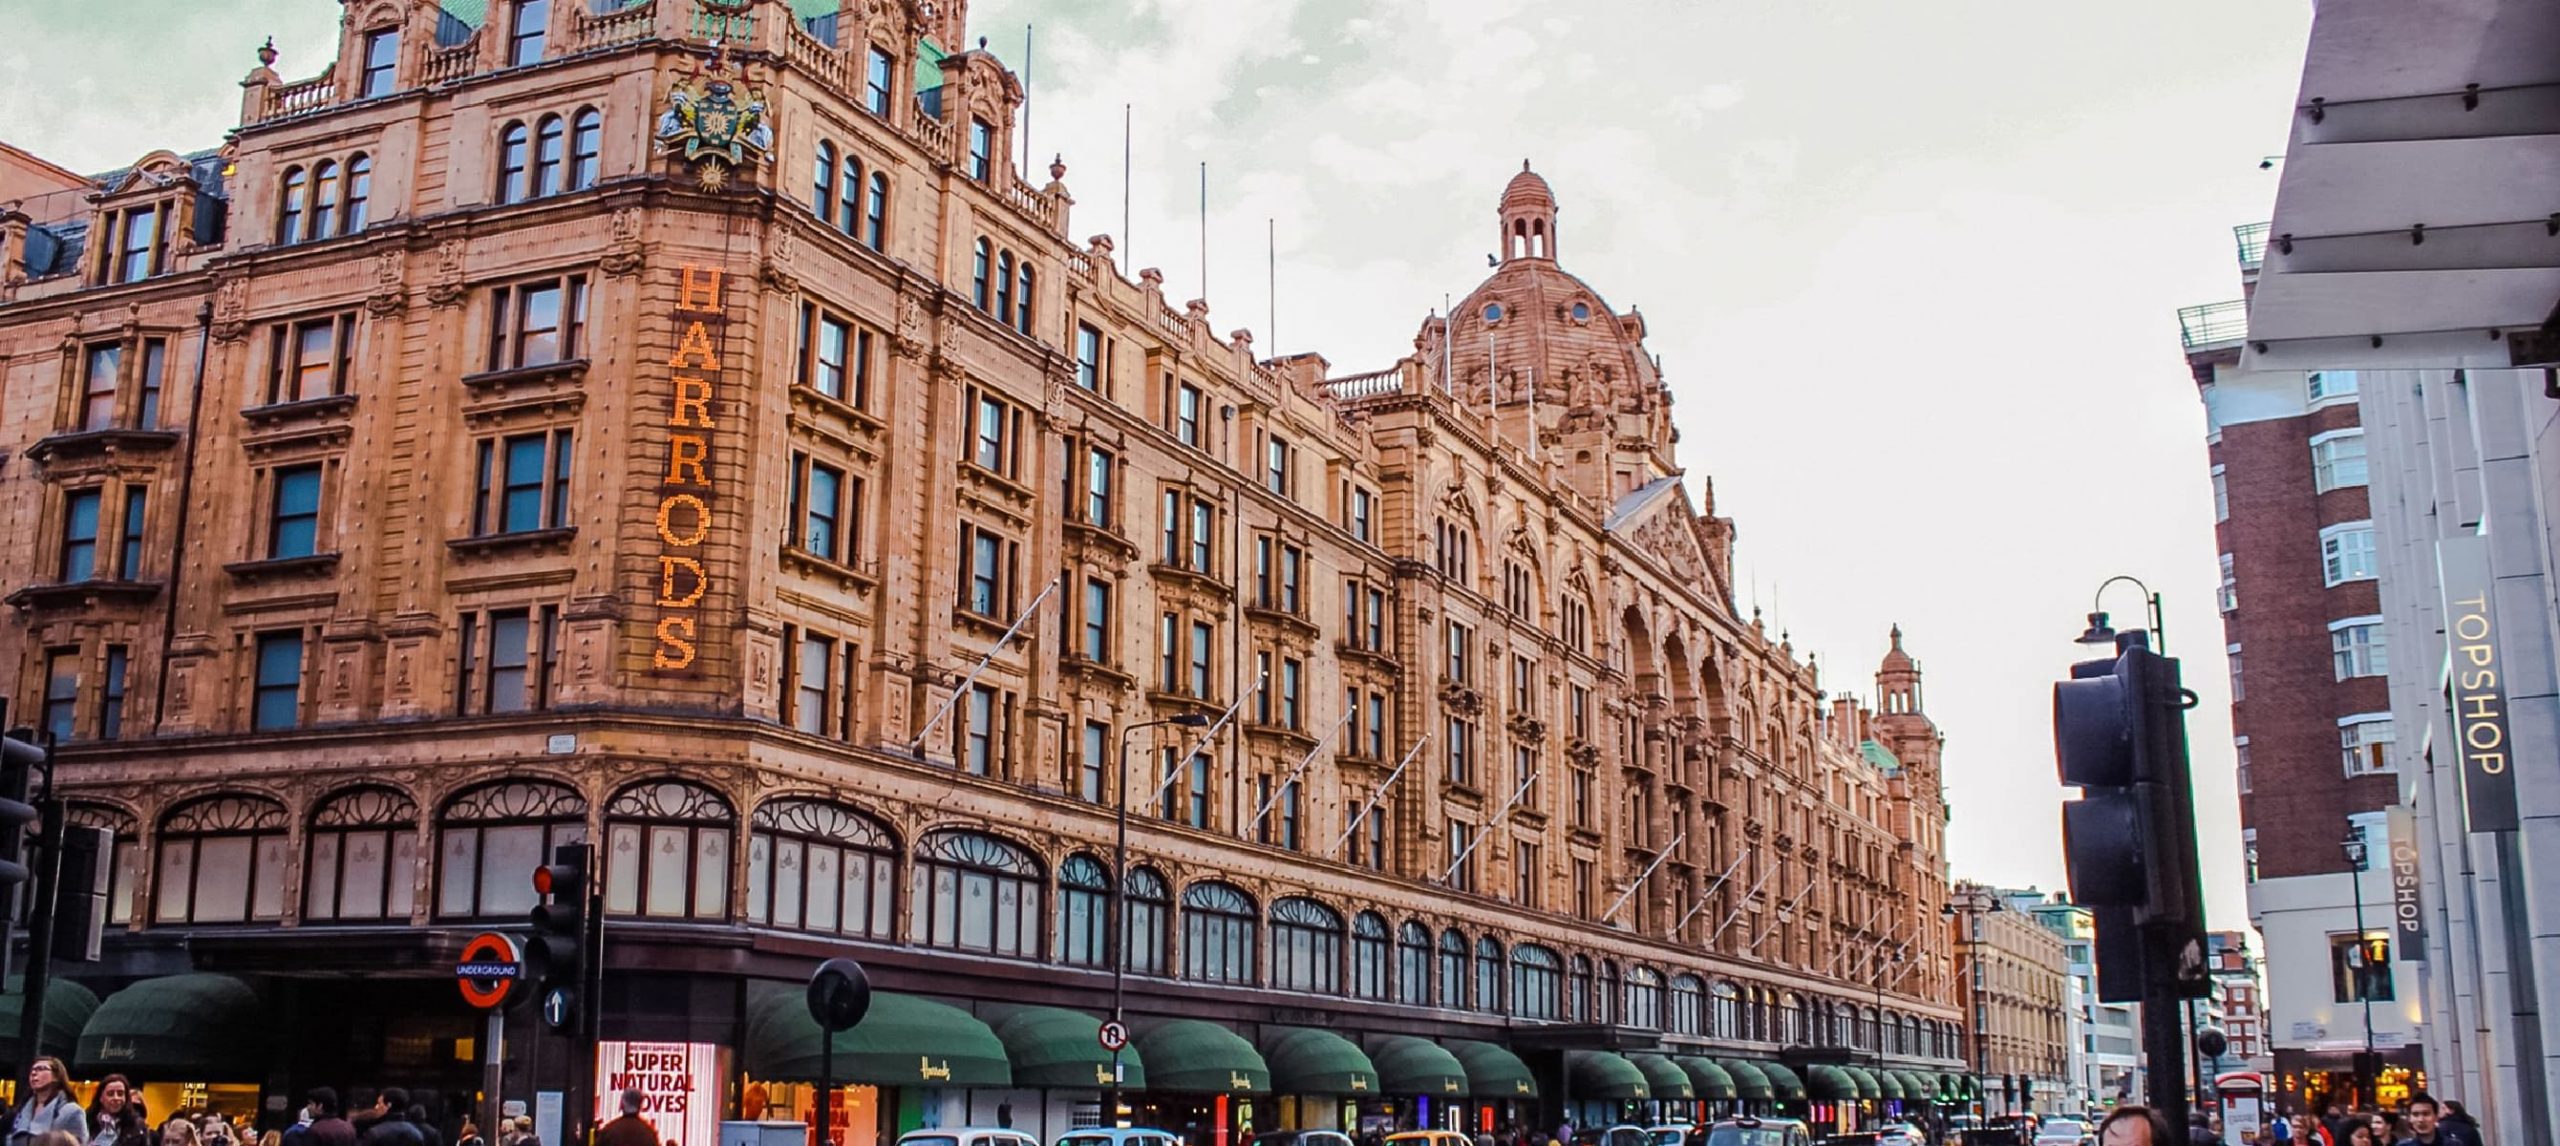 Shopping In London: The Harrods department store